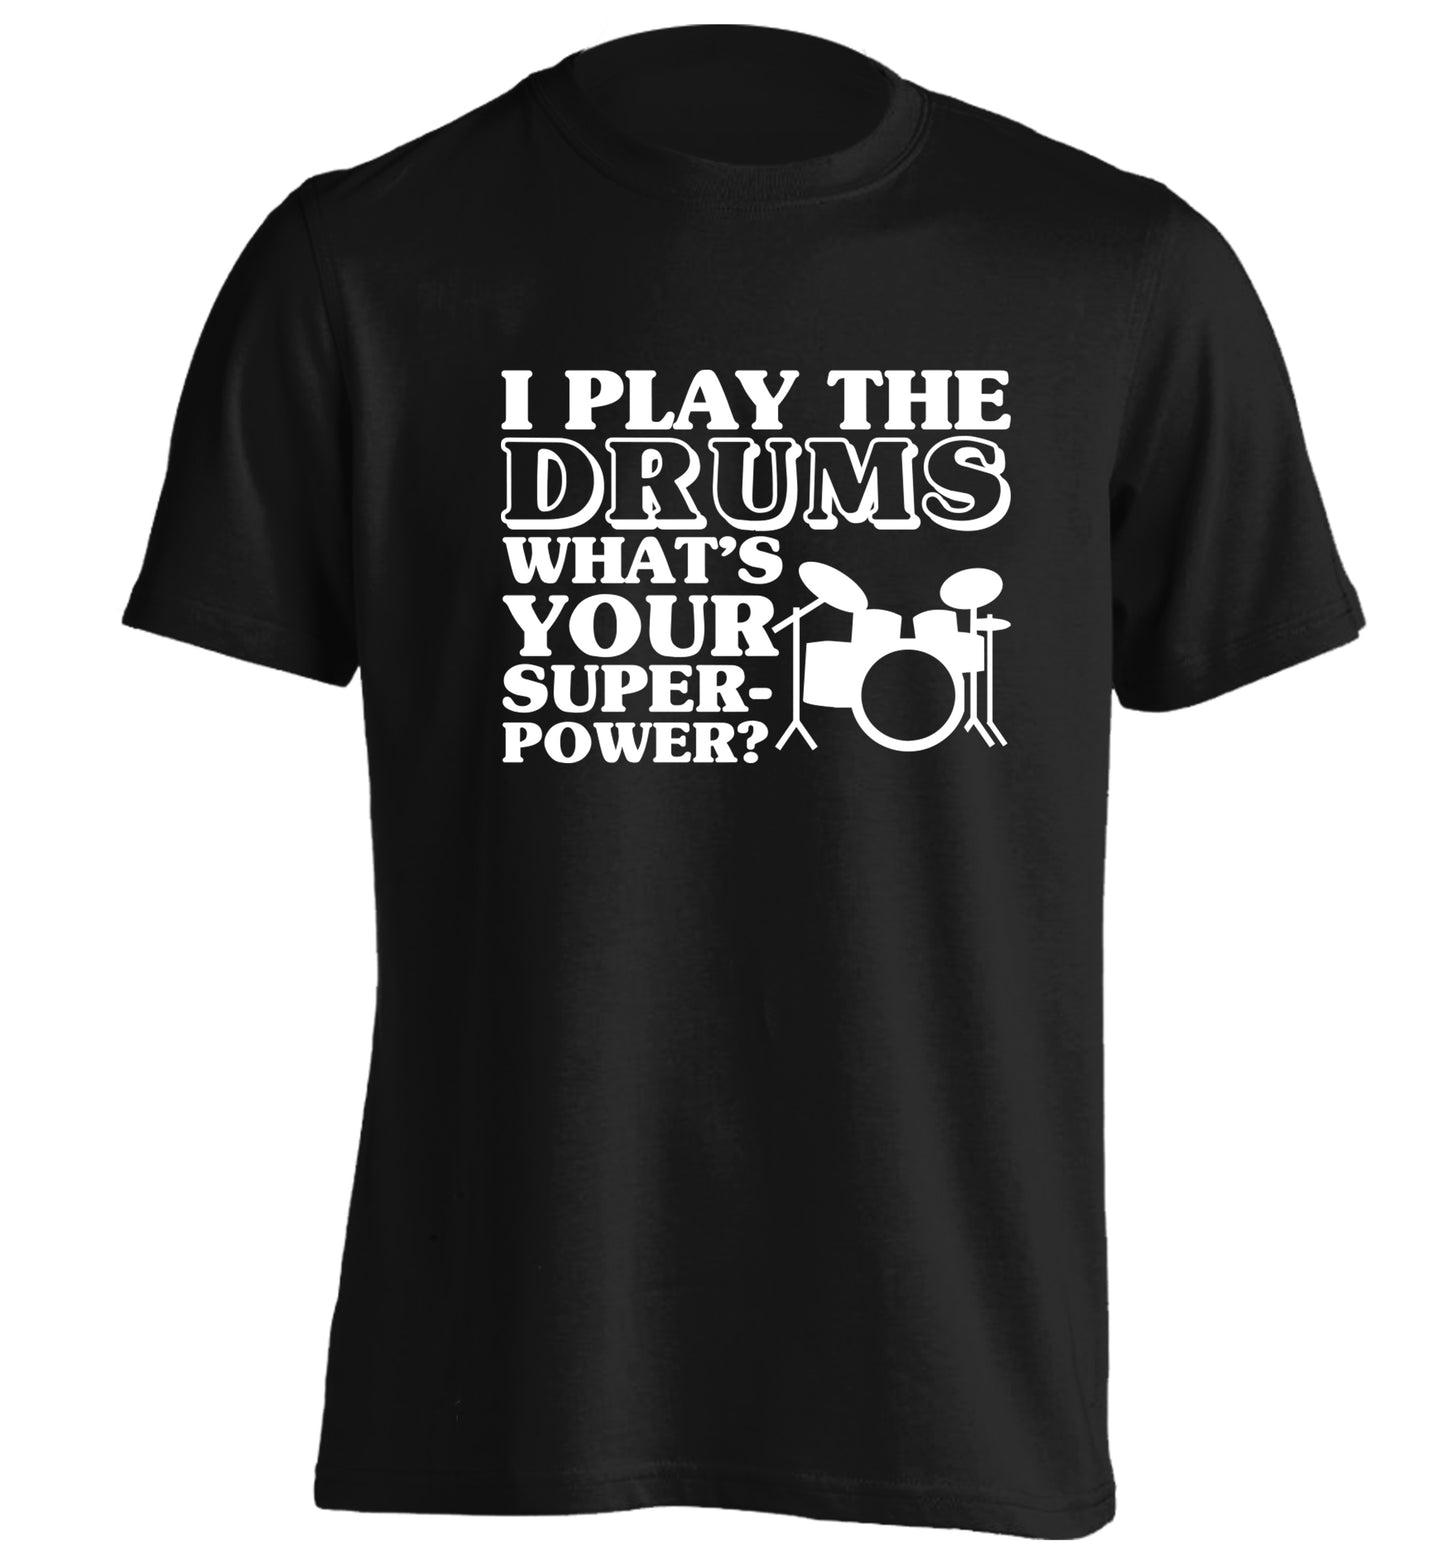 I play the drums what's your superpower? adults unisexblack Tshirt 2XL